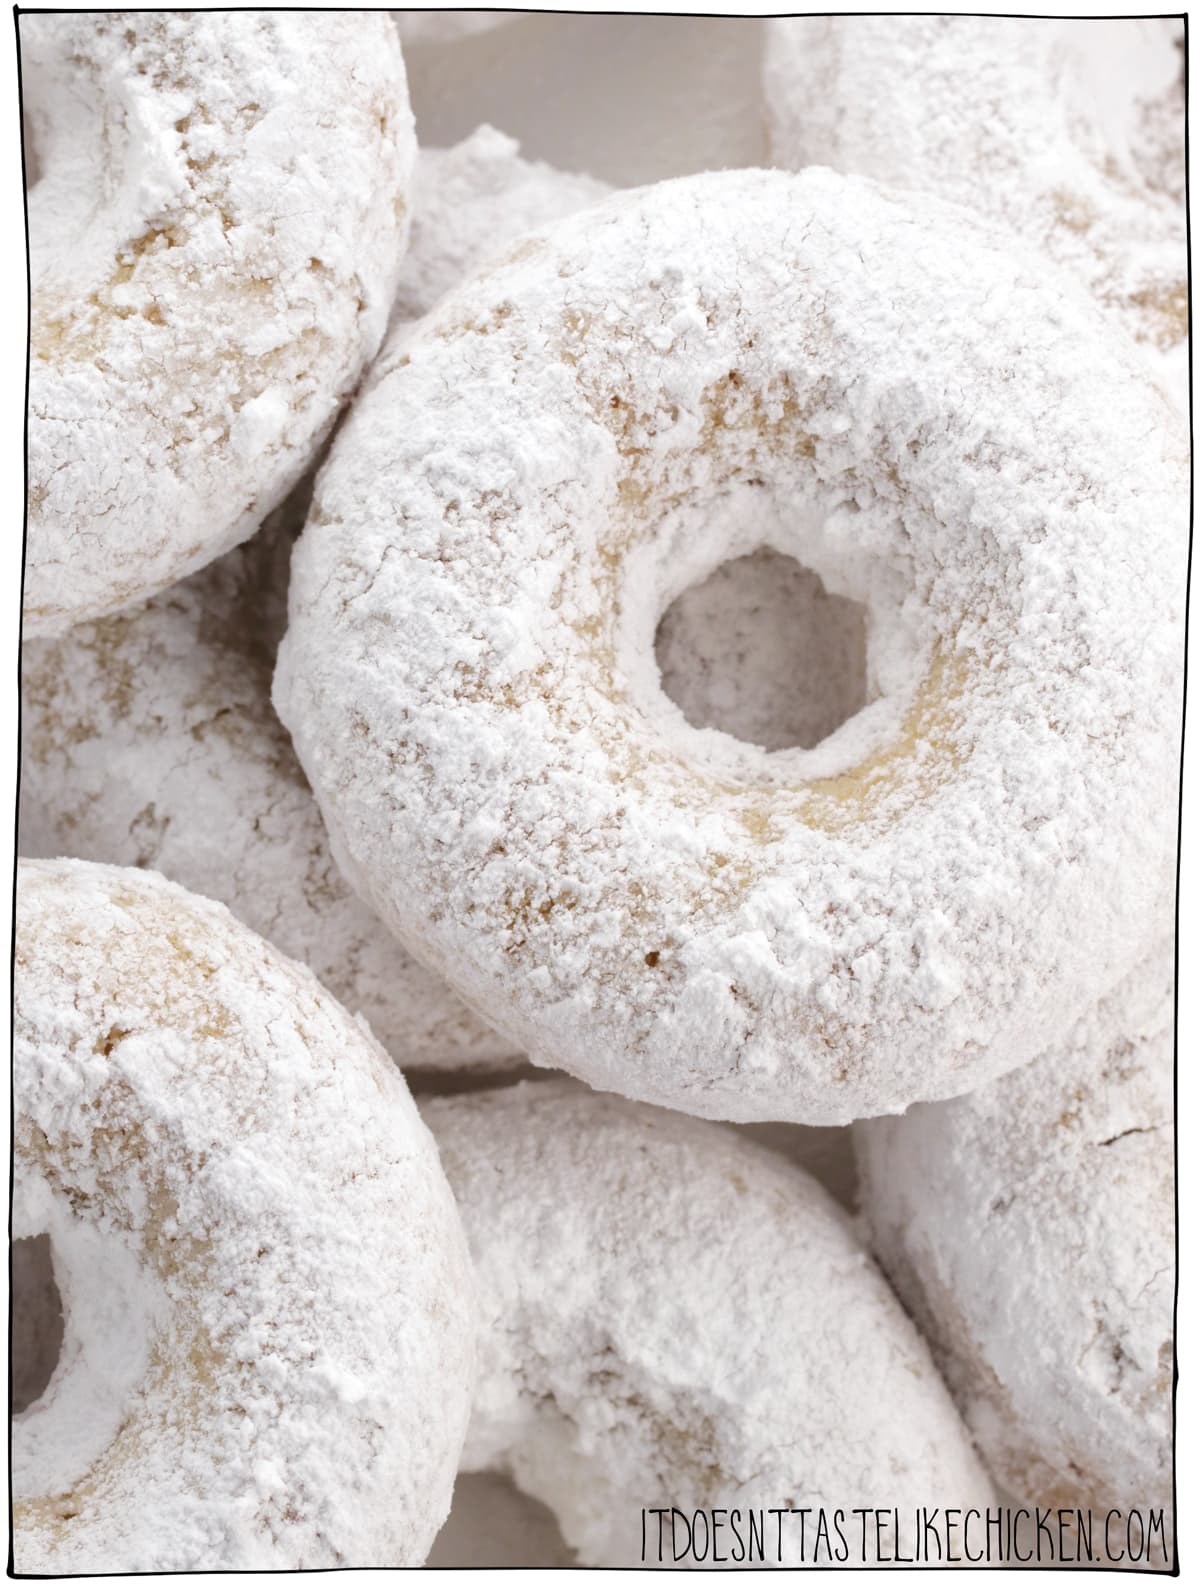 Vegan Powdered Donuts! Homemade donuts are easy to make and taste just like old fashioned white sugar powdered donuts. These baked donuts are the perfect dessert or snack! #itdoesnttastelikechicken #veganrecipes #donuts #veganbaking